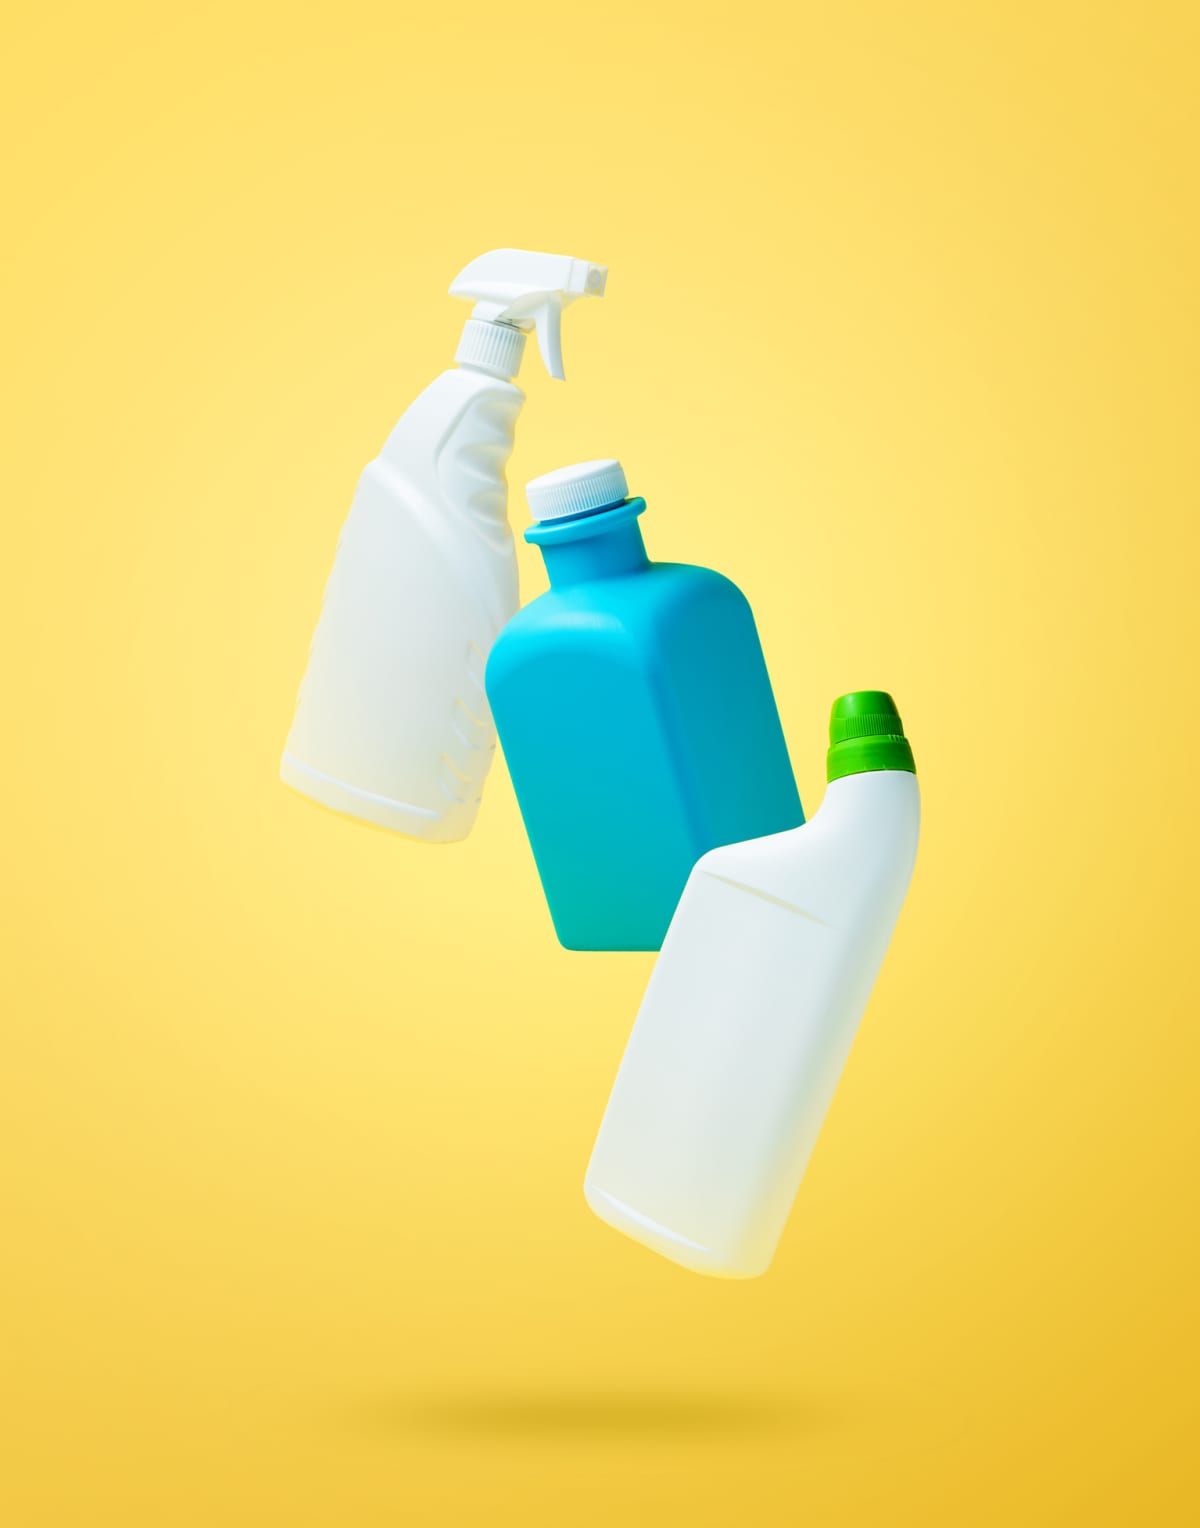 Bottles of cleaning products against yellow background